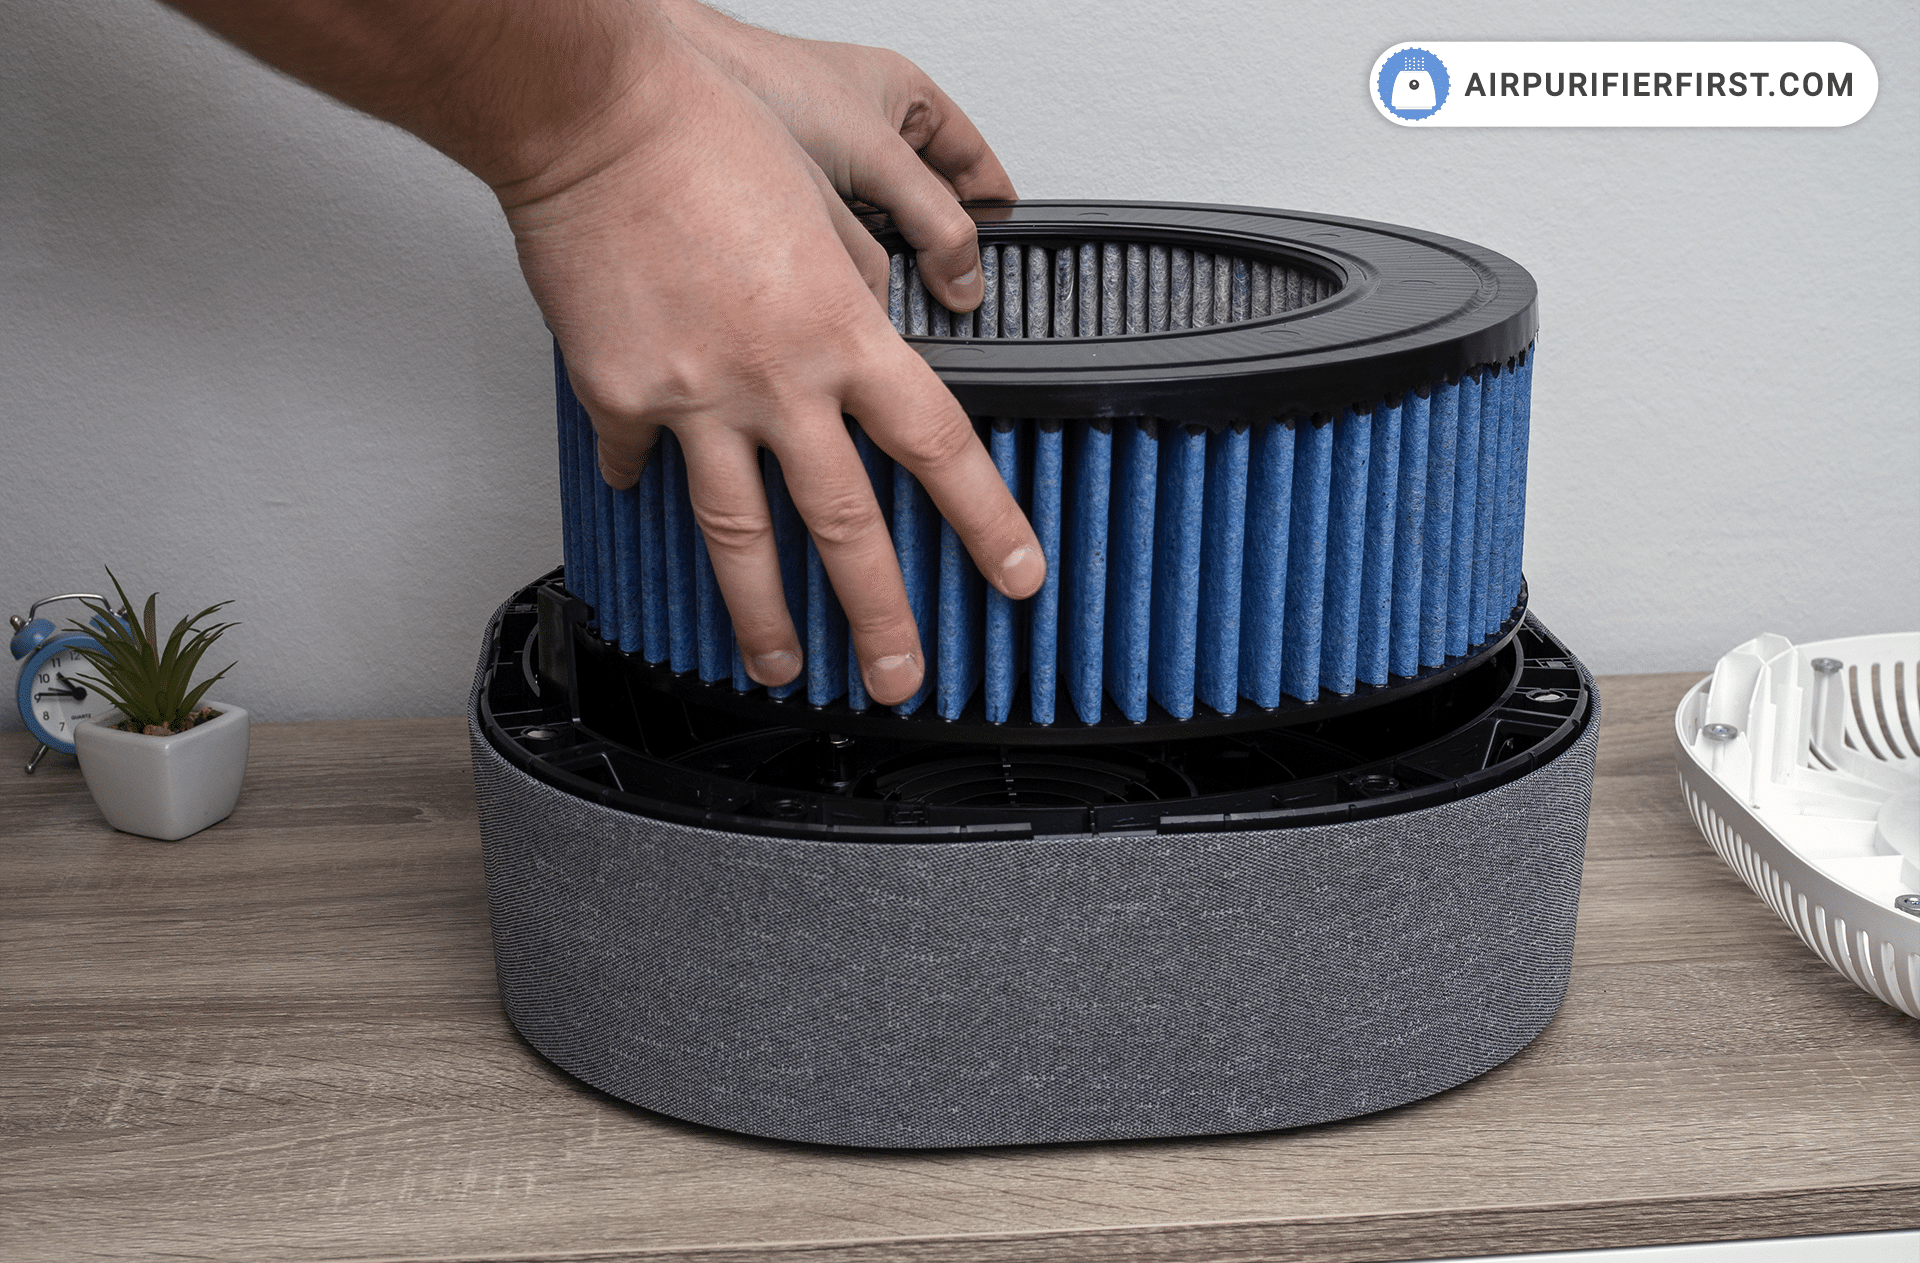 Placing new Ray-filter inside the air purifier